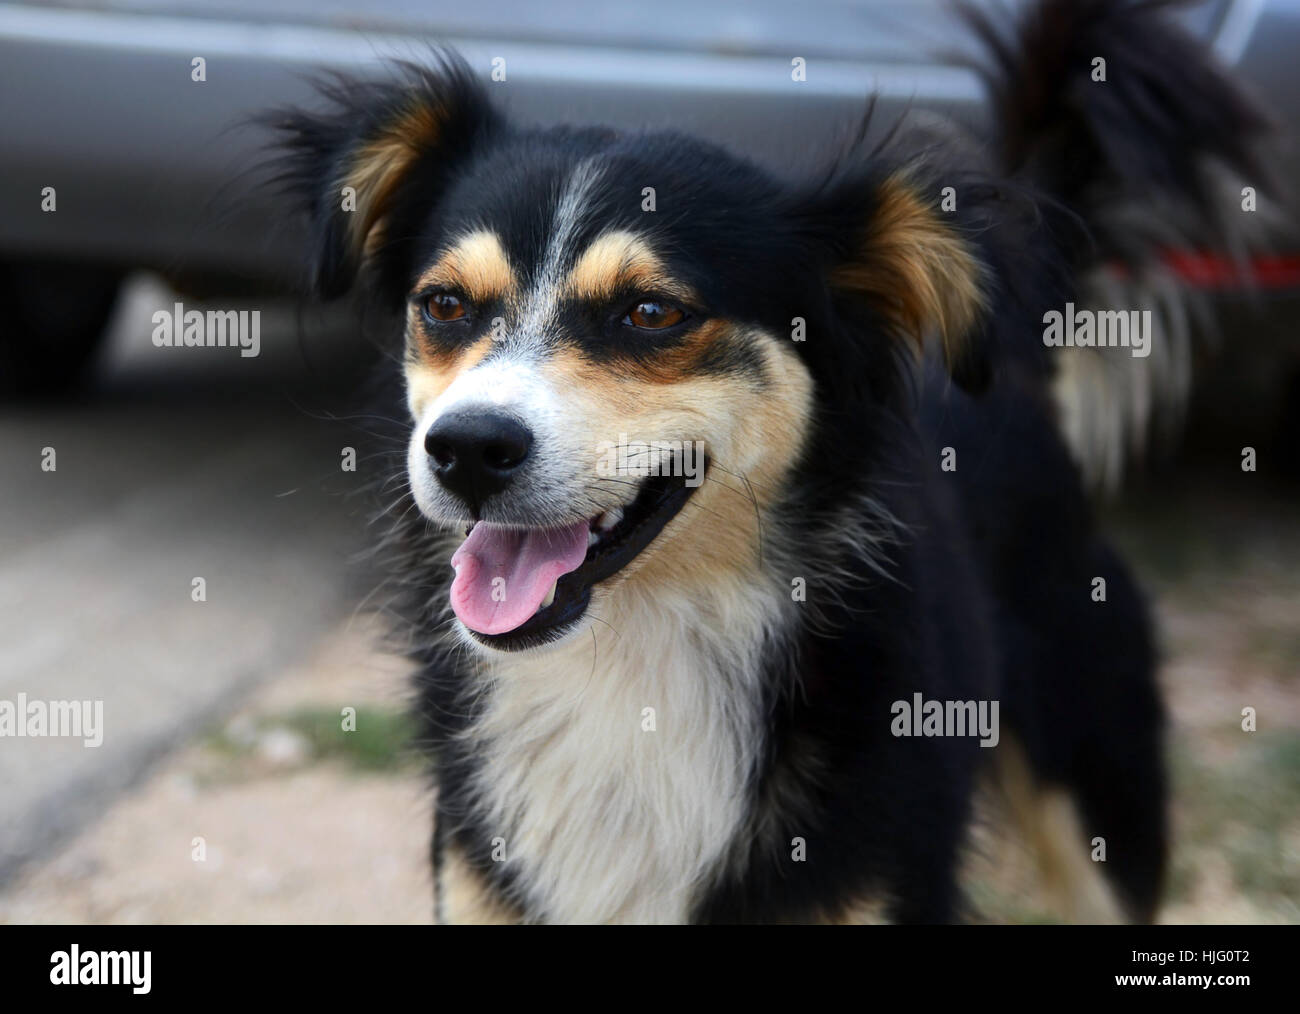 Cute funny dog on the street Stock Photo